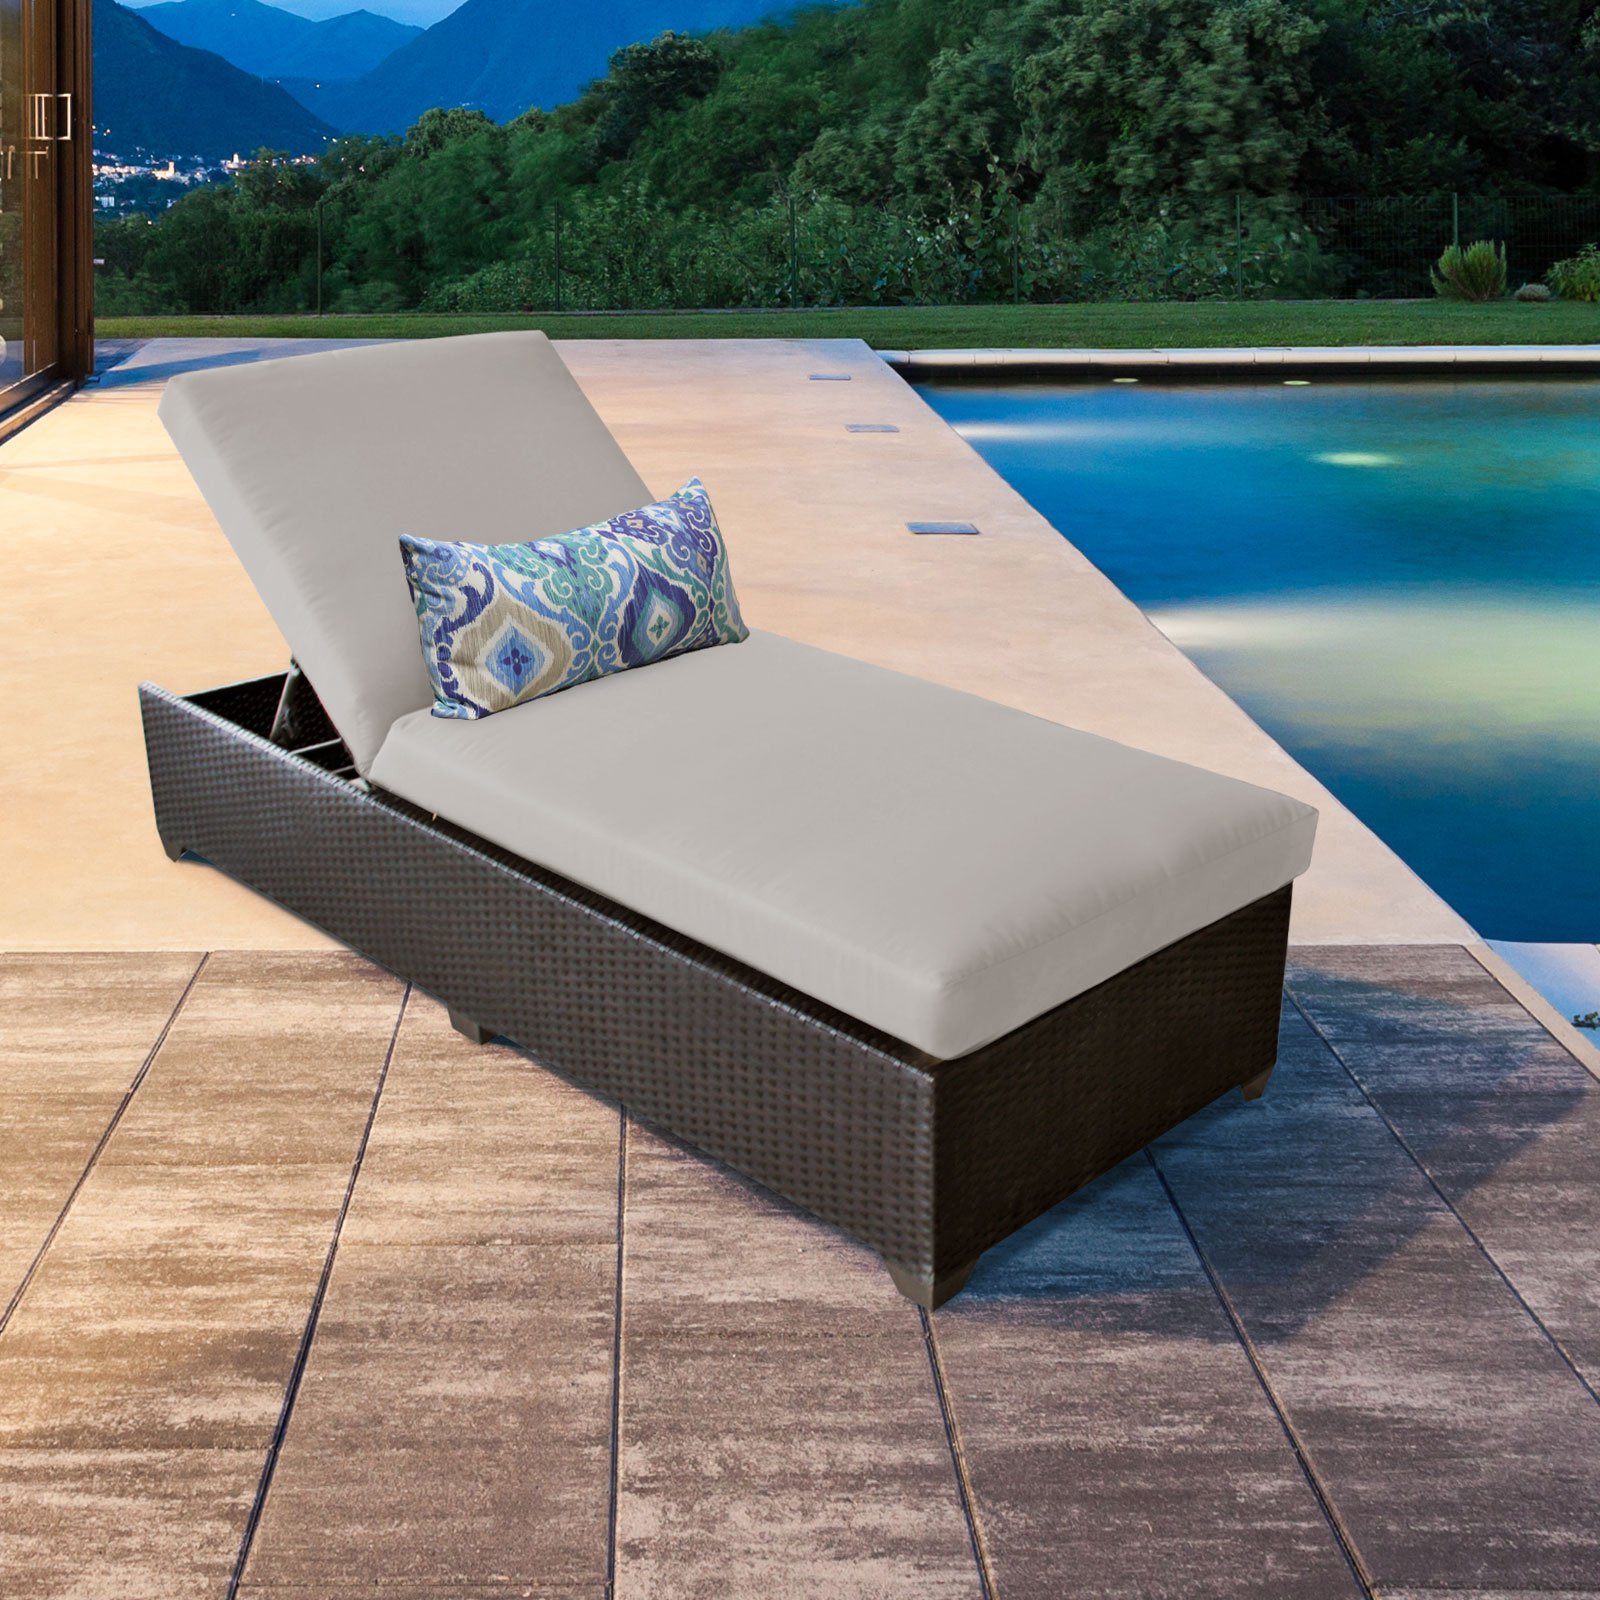 Barbados Chaise Outdoor Wicker Patio Furniture with Side Table in Cilantro - image 3 of 10